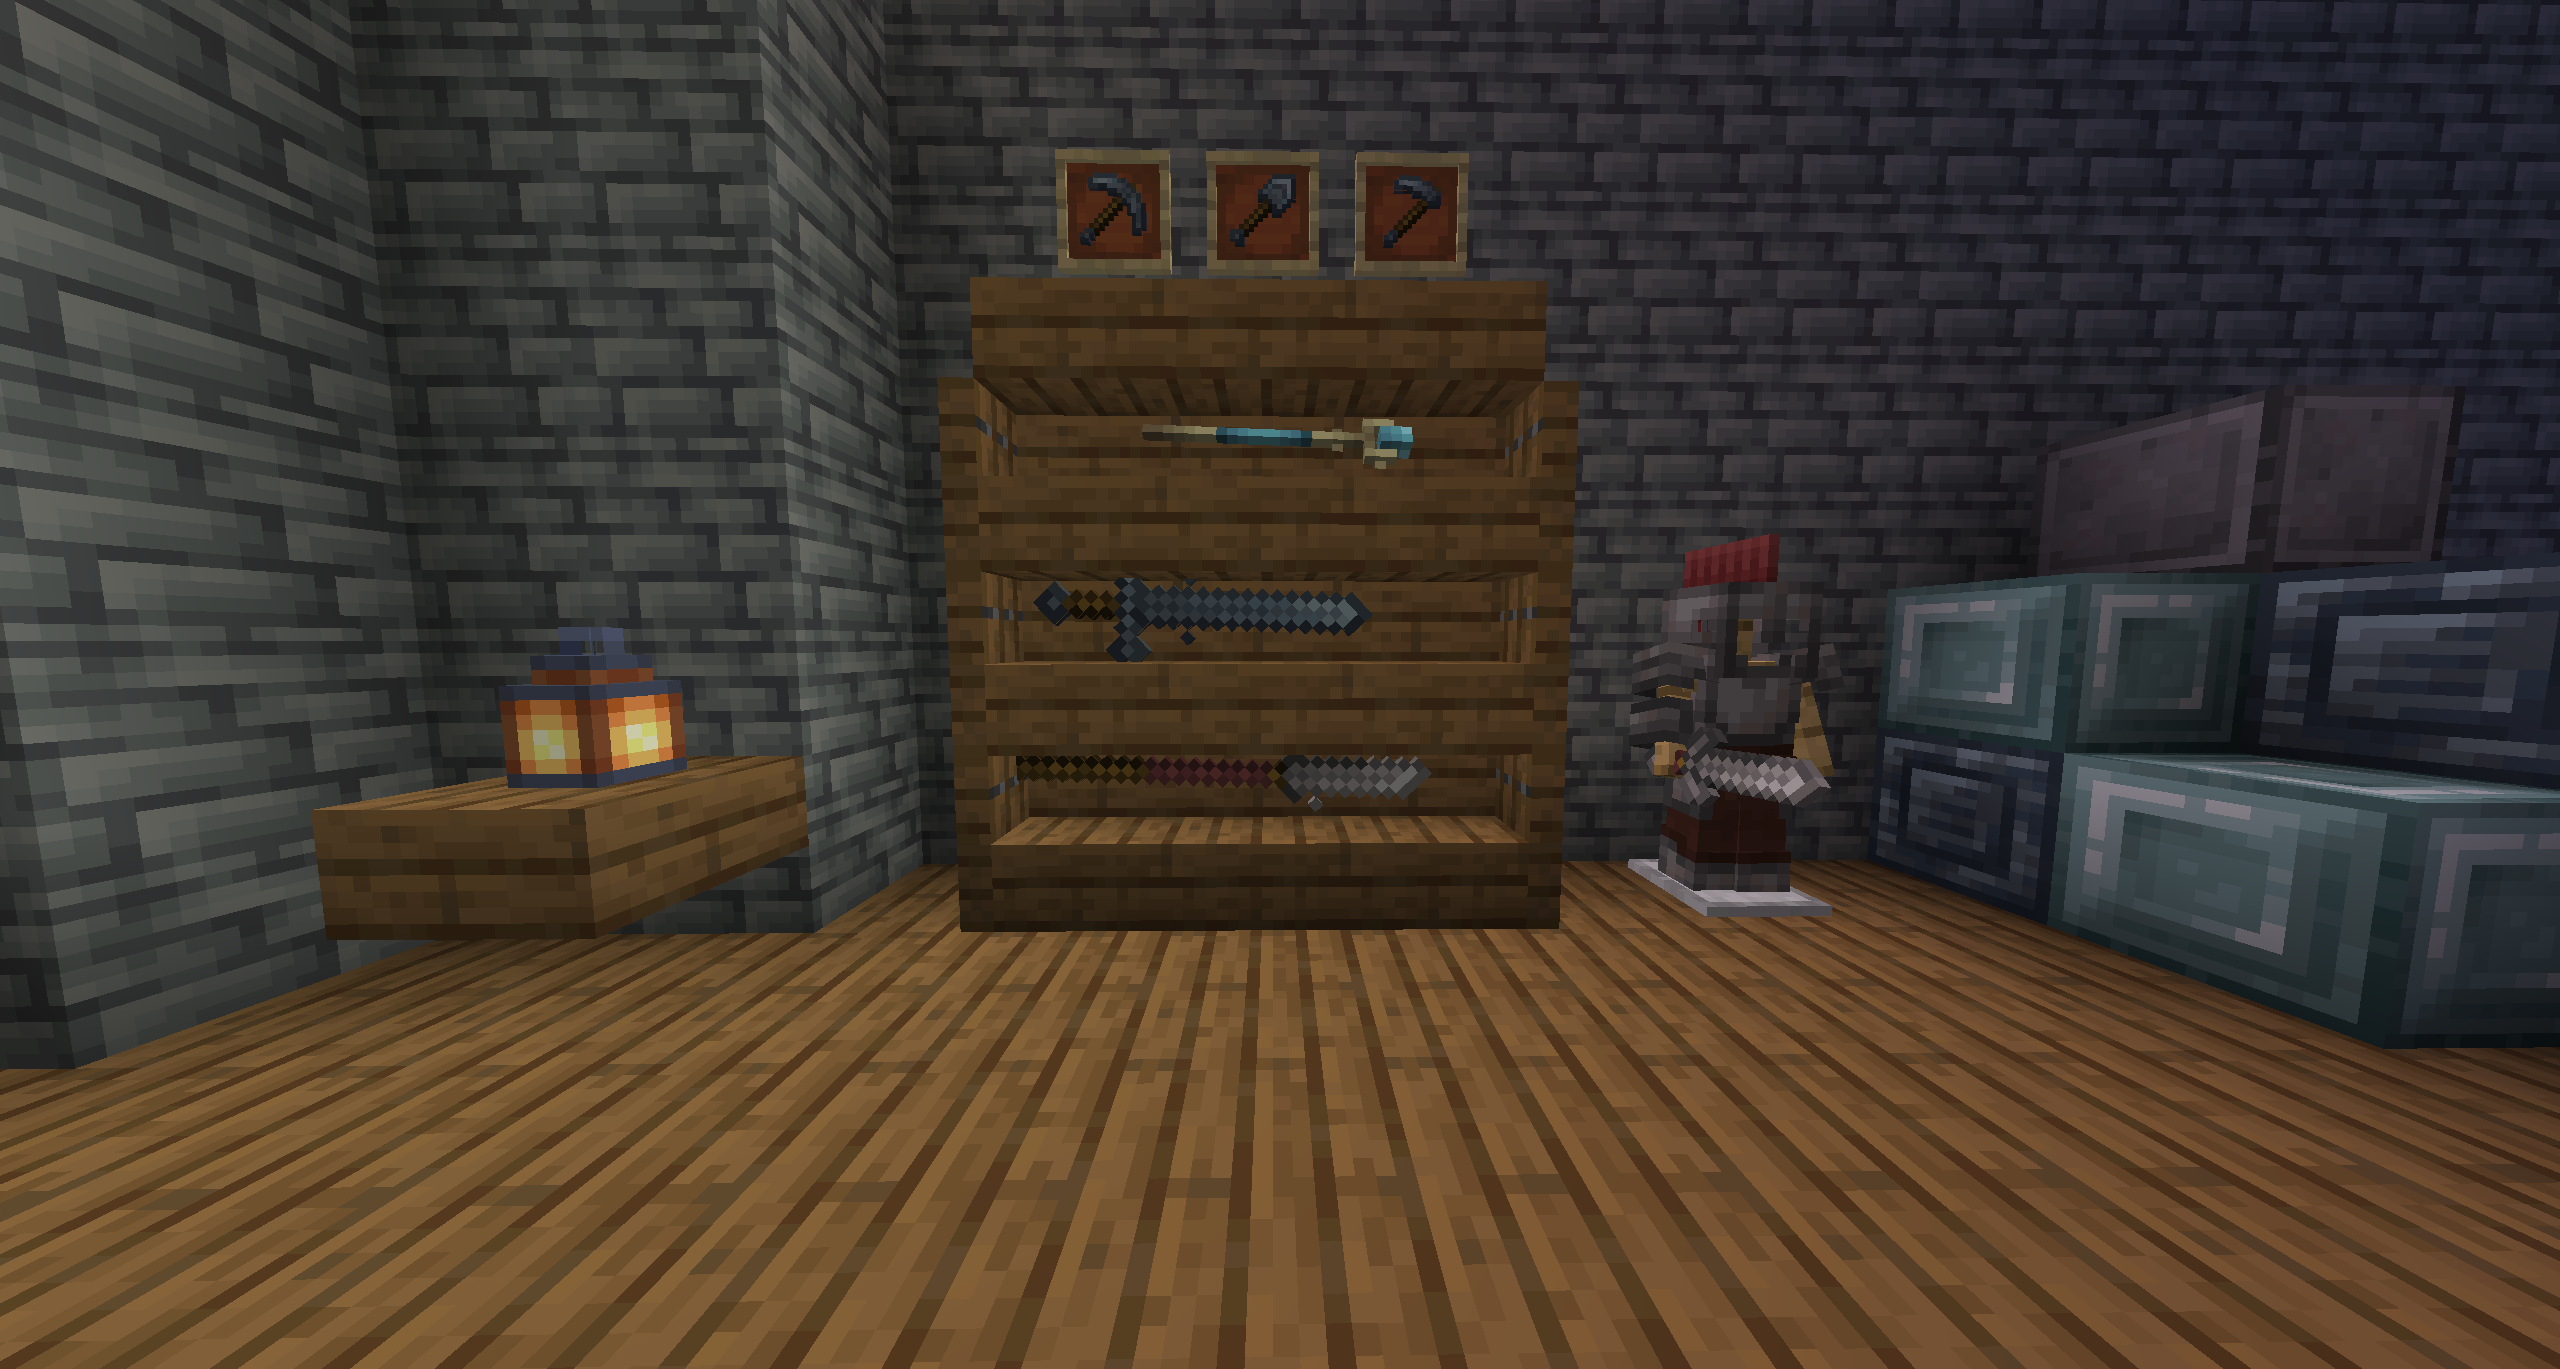 Multiple items/weapons displayed using armor stands and item frames. Platinum tools, steel weapons & armor, the Stormcaller's Staff, and various metallic blocks